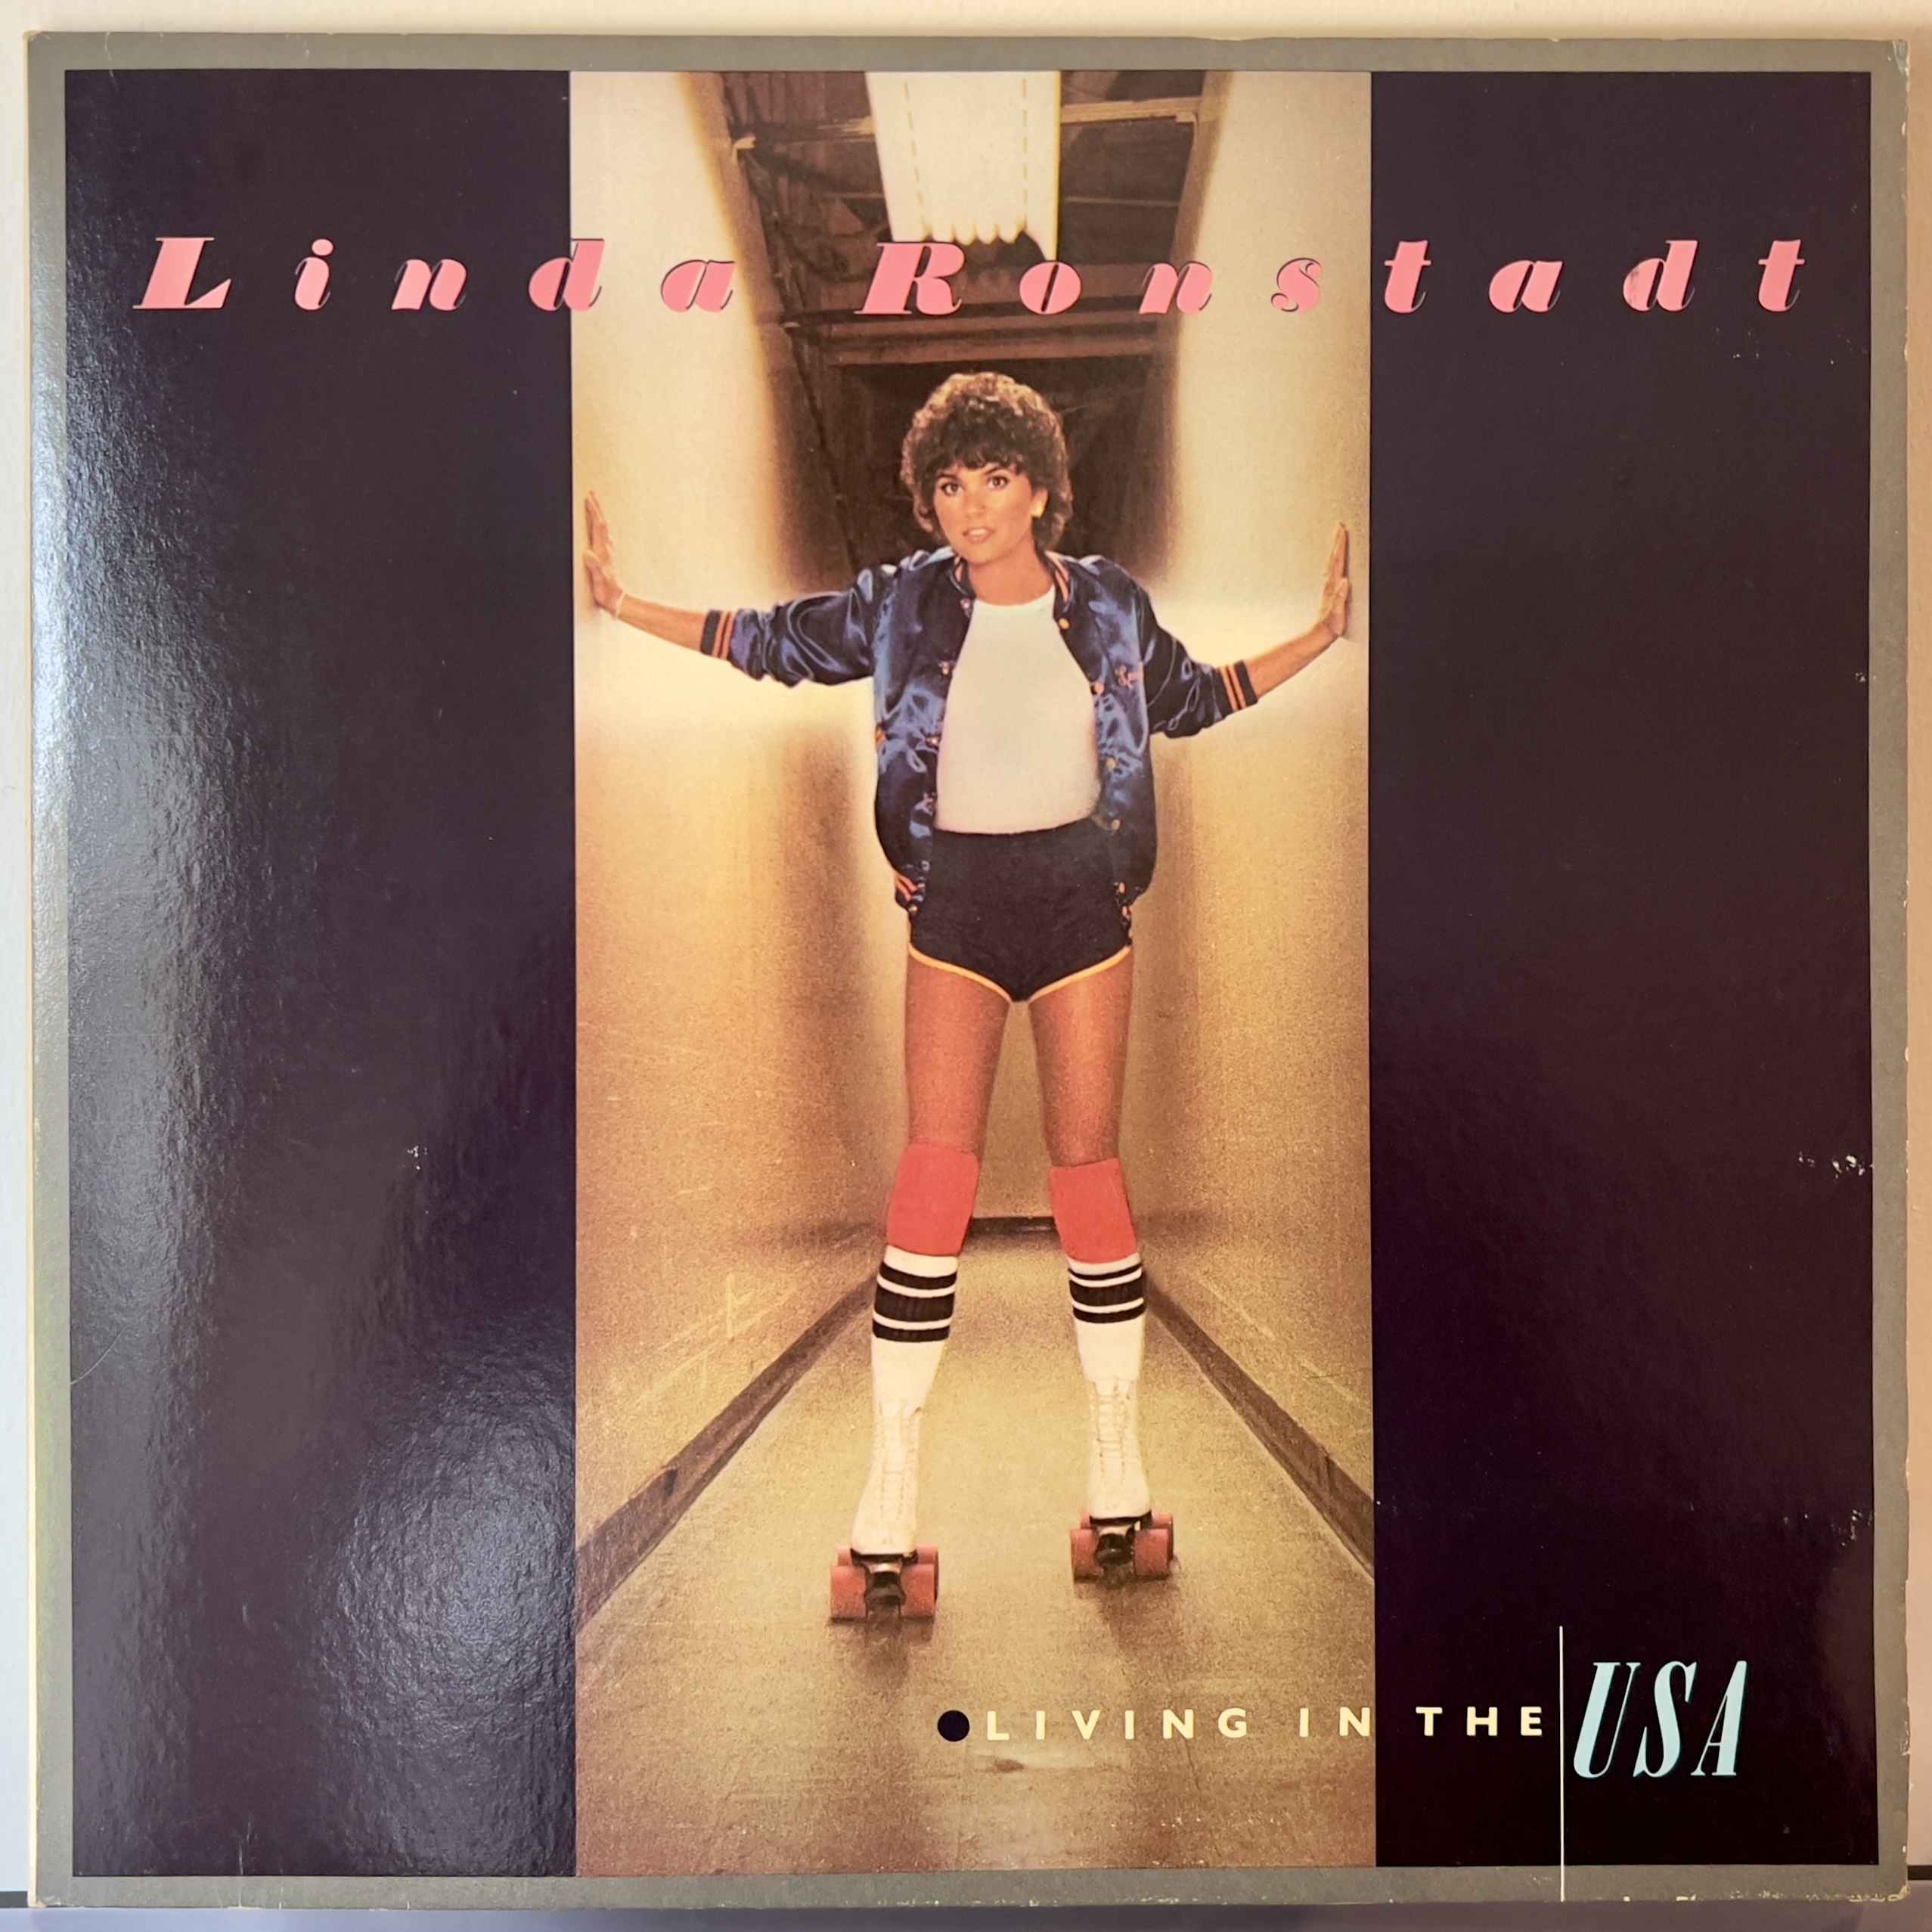 Living in the USA by Linda Ronstadt